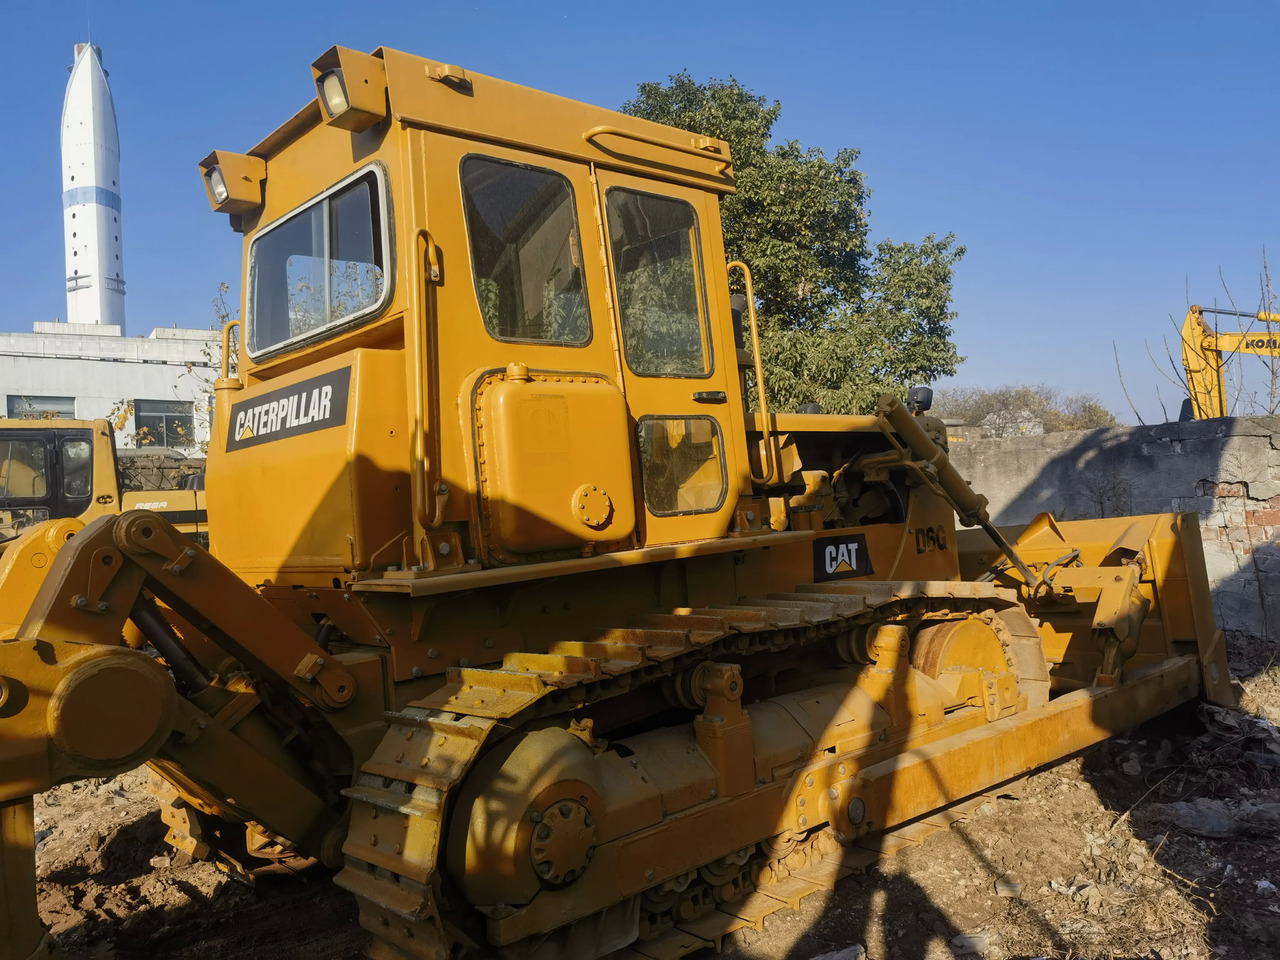 Japan made bulldozer caterpillar D6G D6M D7H D7R D5K used Bulldozer with winch for sale - Bulldozer: picture 5